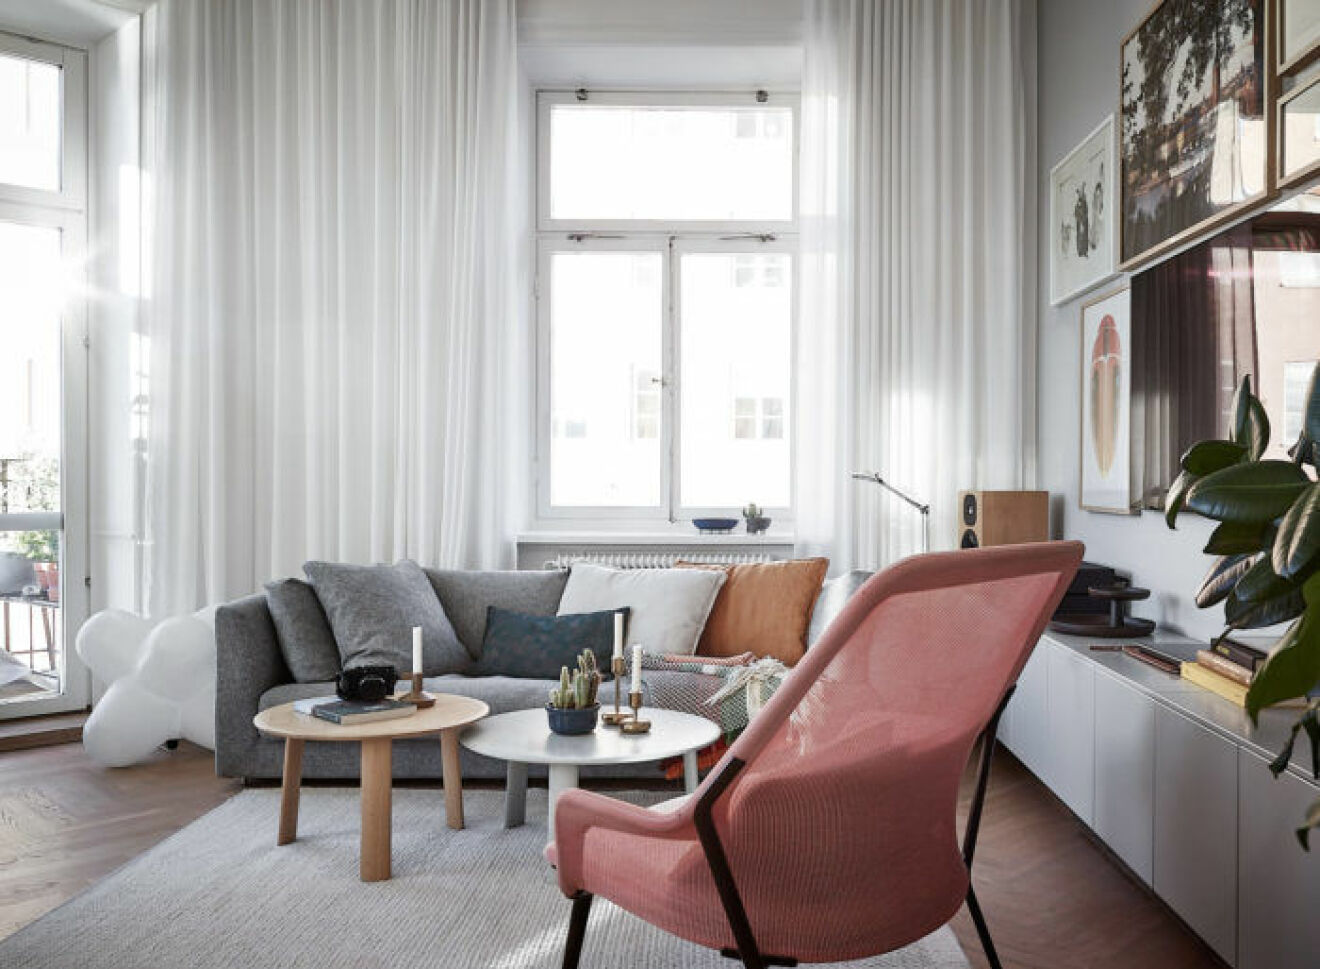 Scandinavian decoration and ideas. Livingroom with grey decor and a pink chair. Long, white curtains.